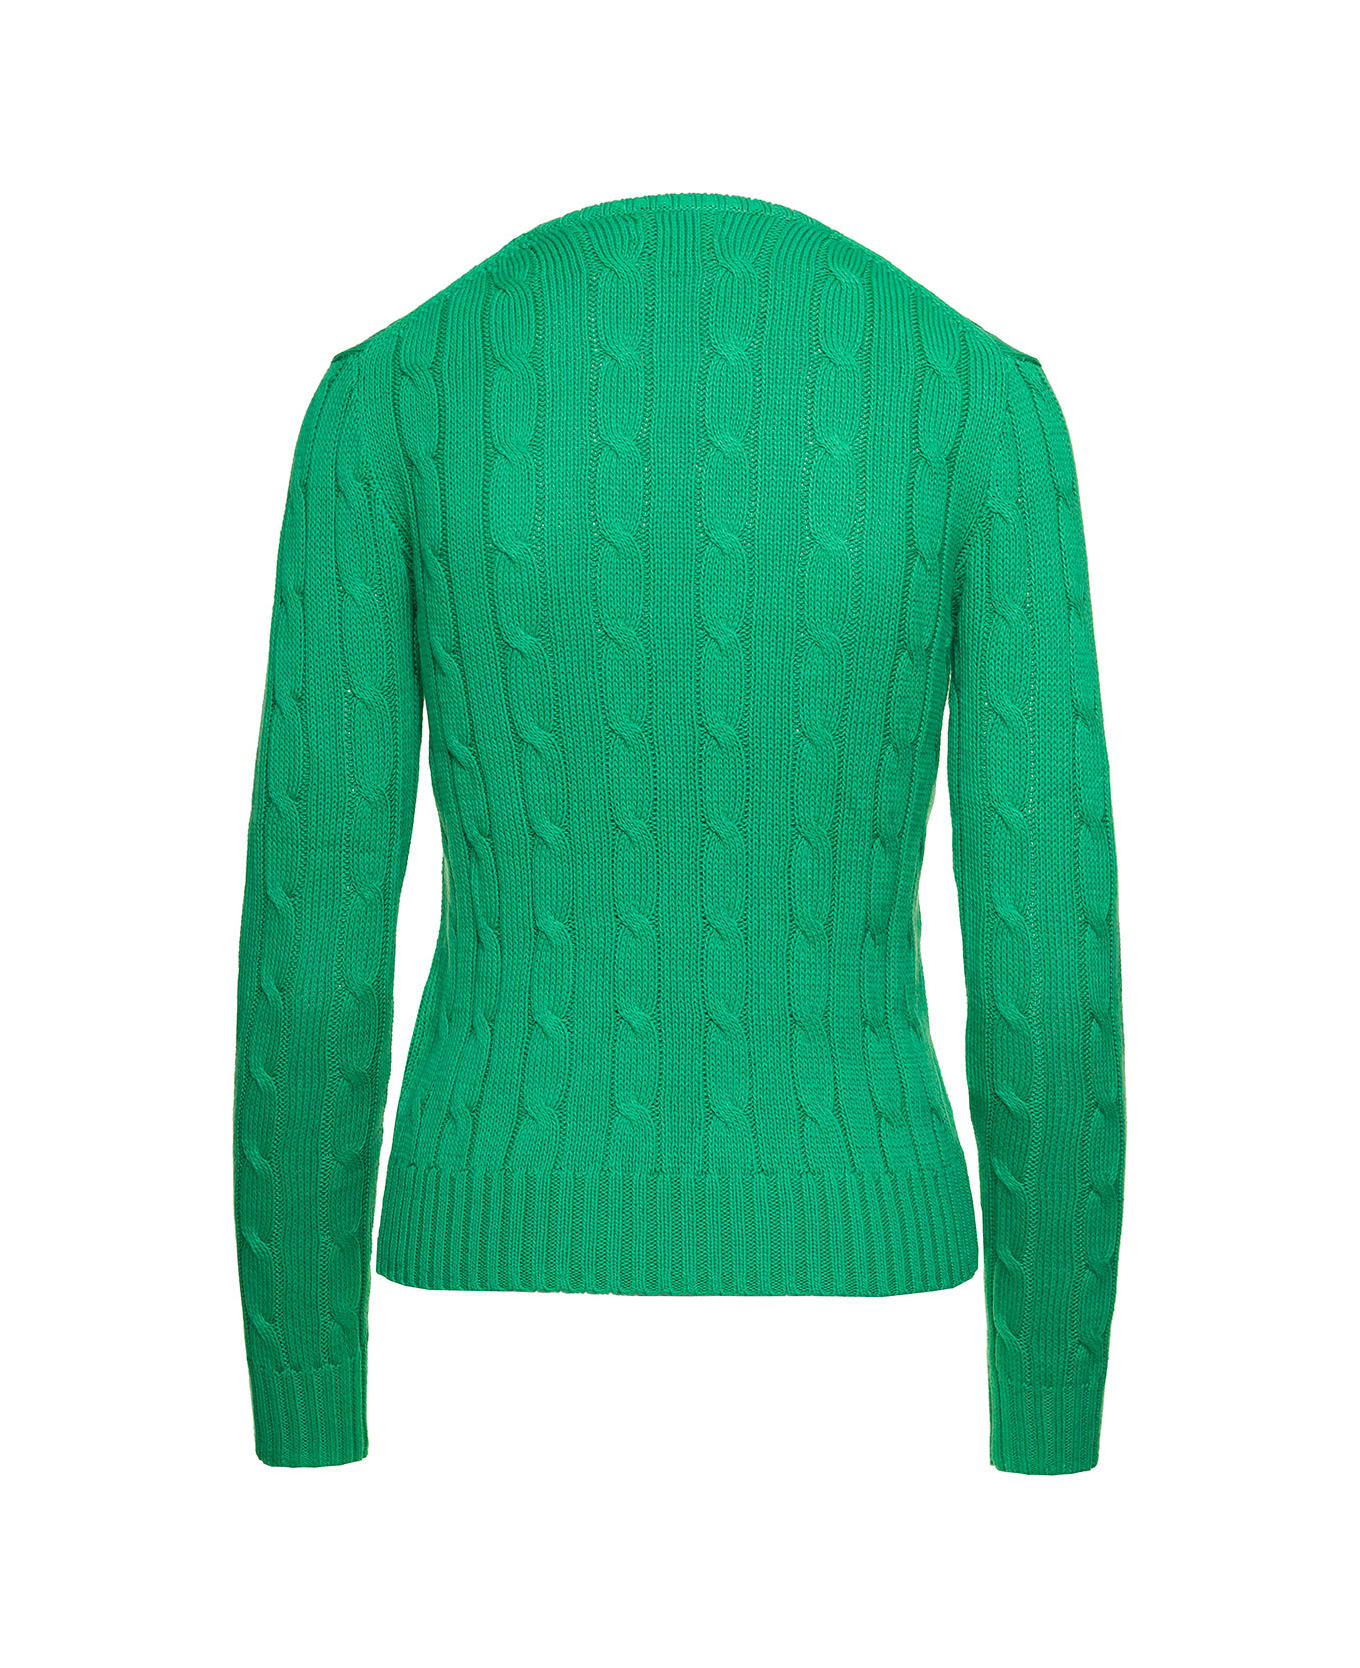 Ralph Lauren 'juliana' Green Cable Knit Pullover With Contrasting Embroidered Logo In Cotton Woman - Green